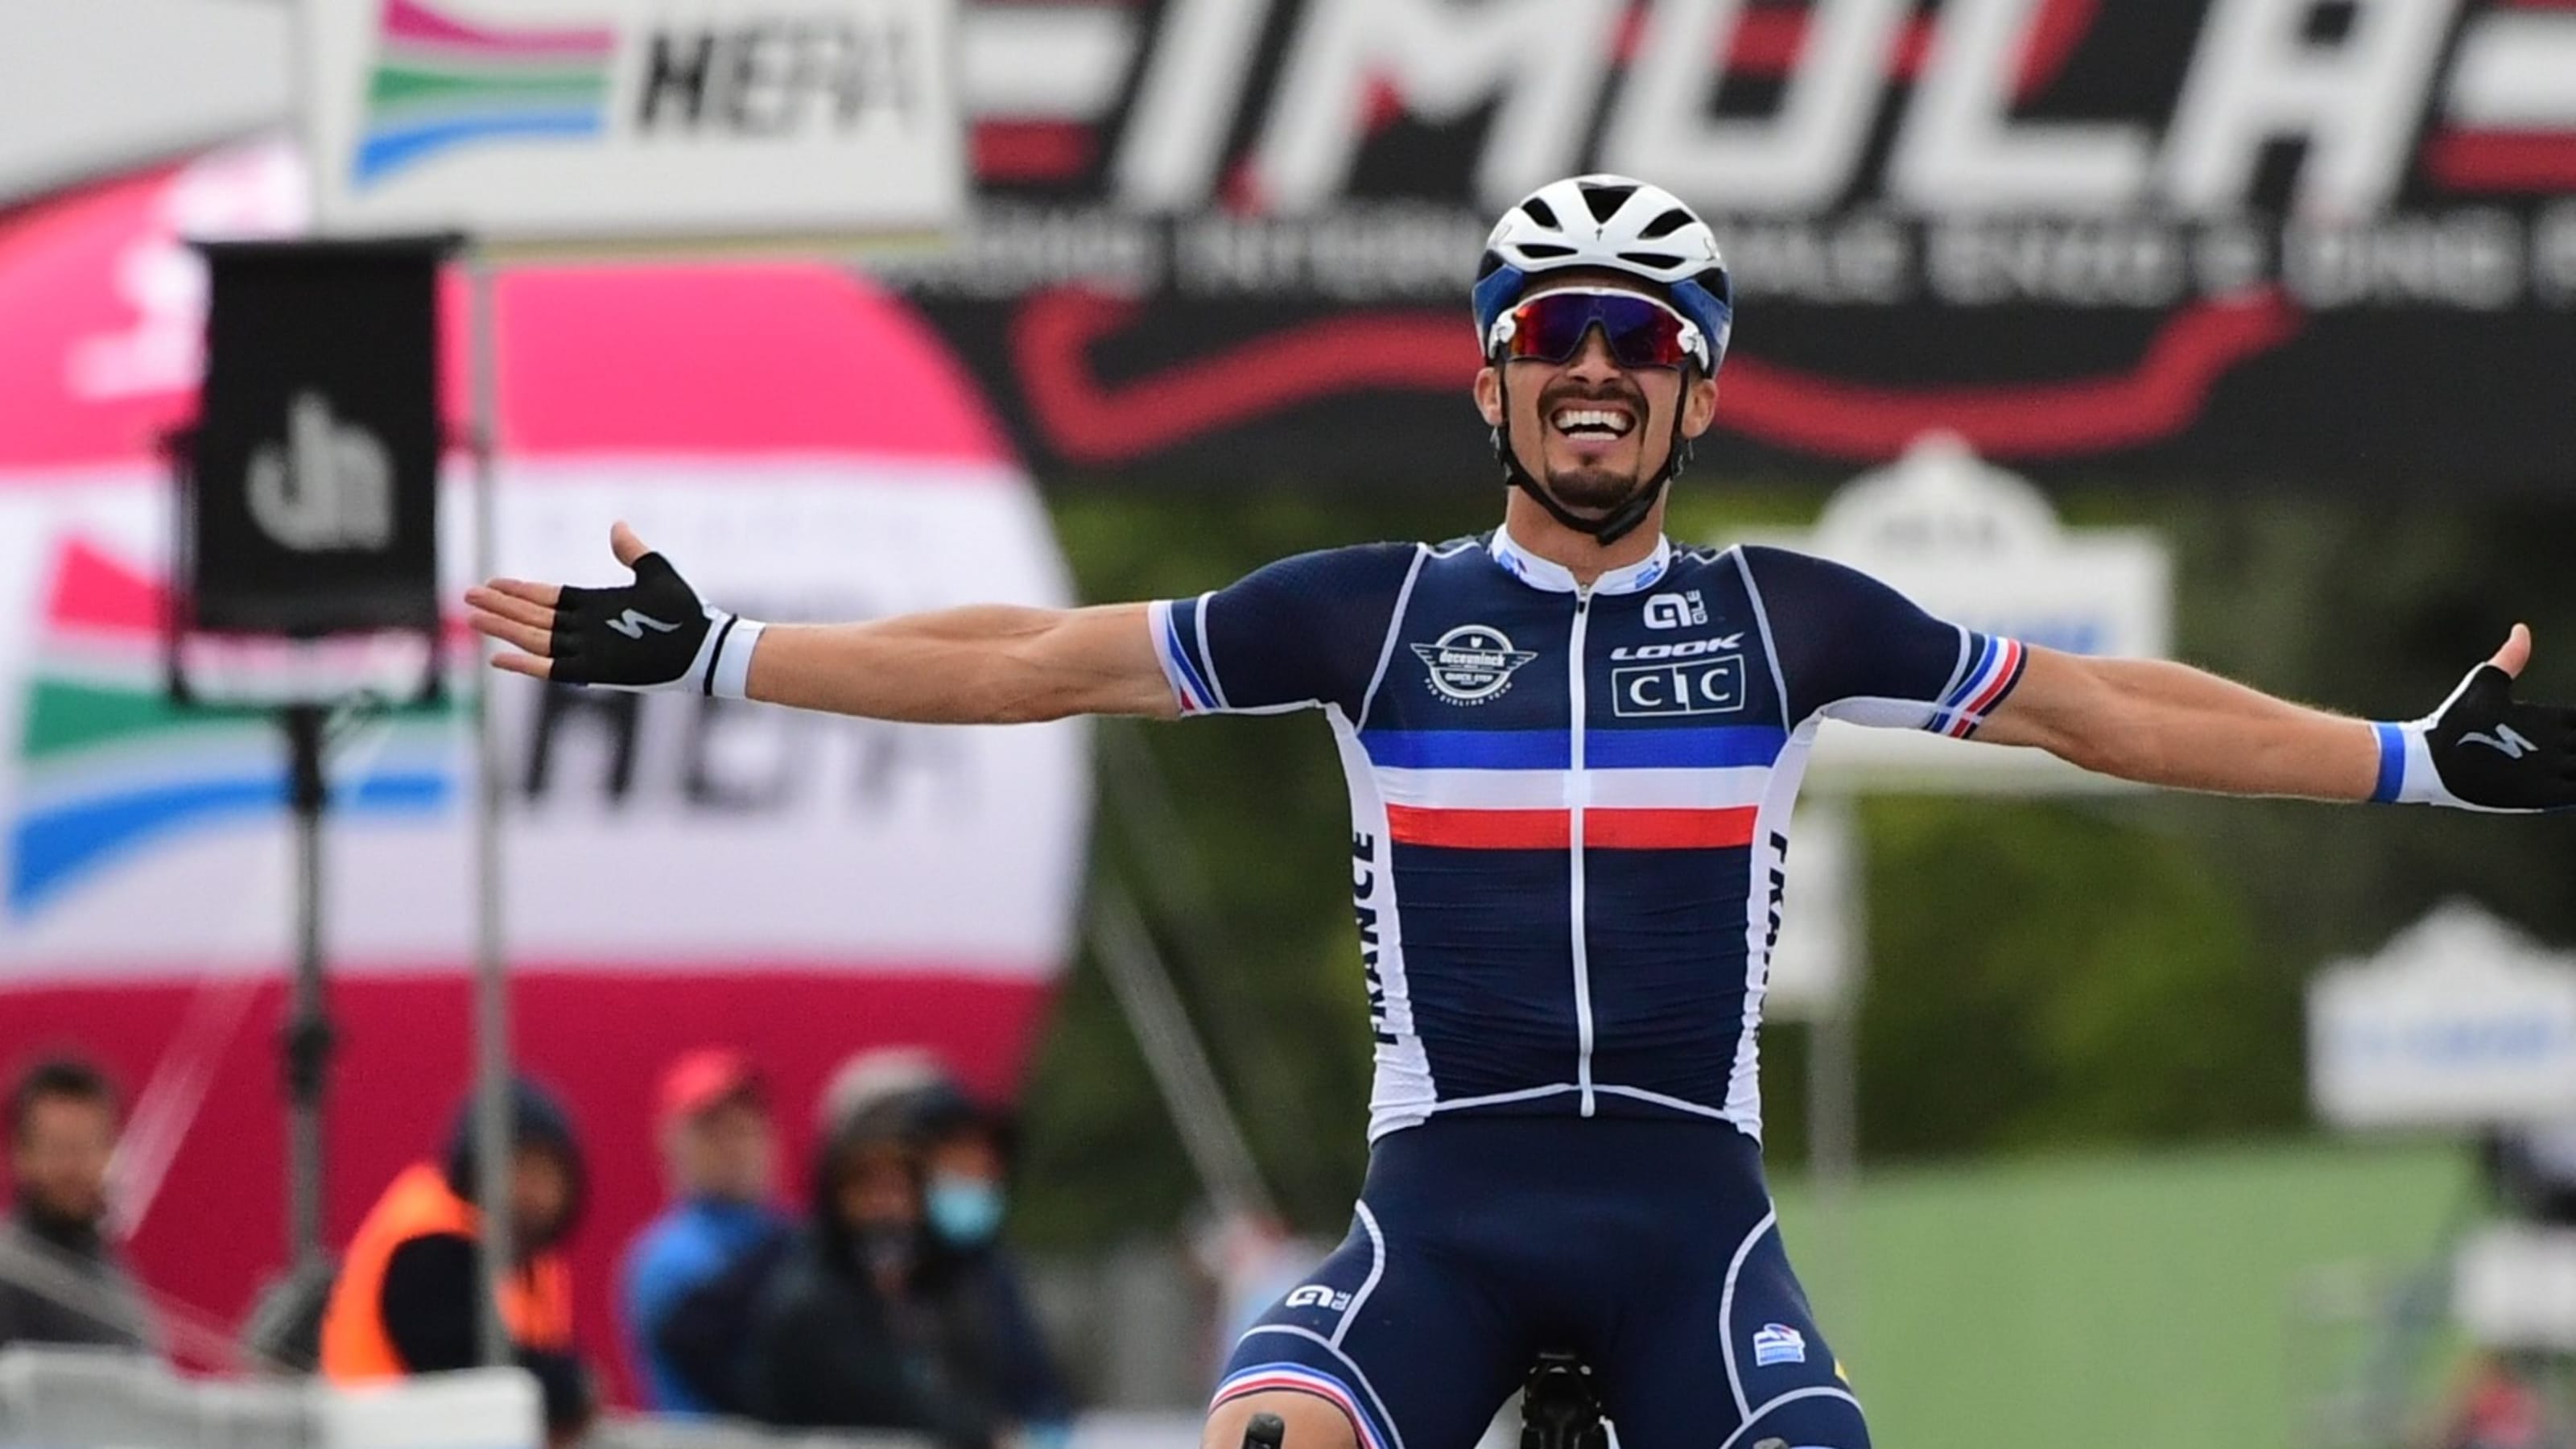 Rundt og rundt Sodavand edderkop Five things we learned from the 2020 UCI Road World Championships